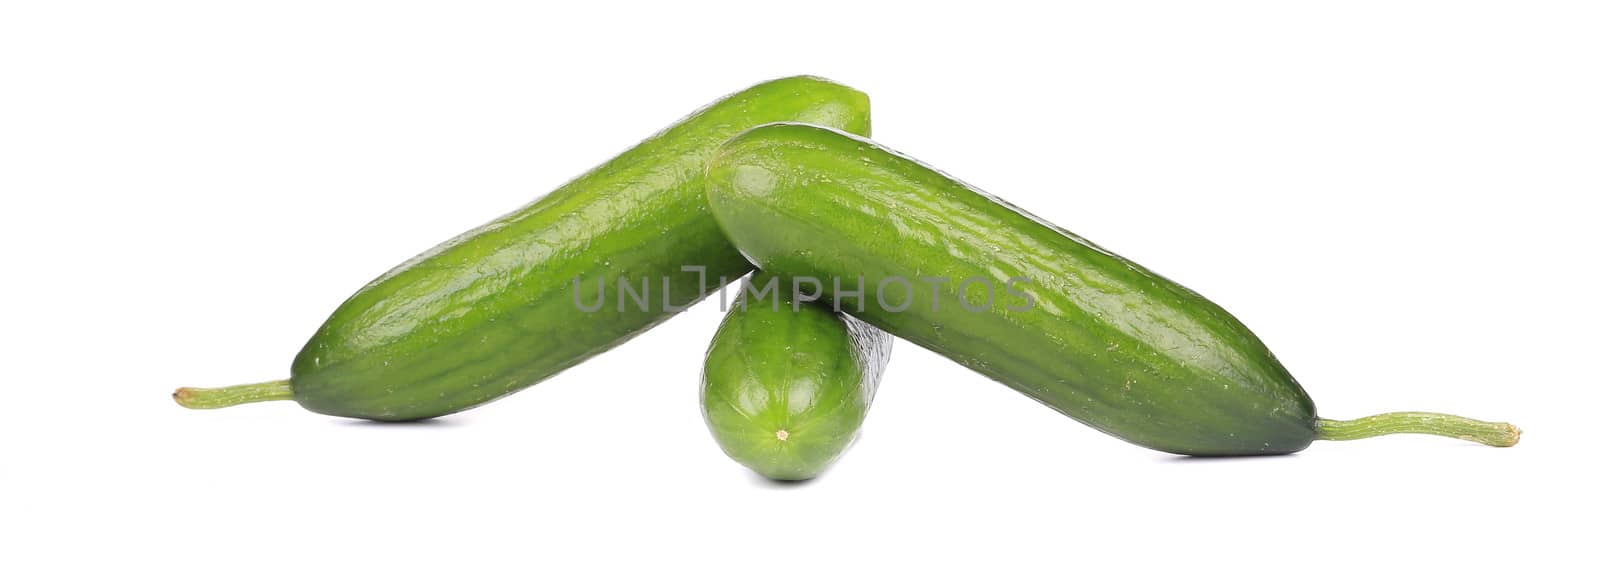 three cucumbers. isolated on a white background